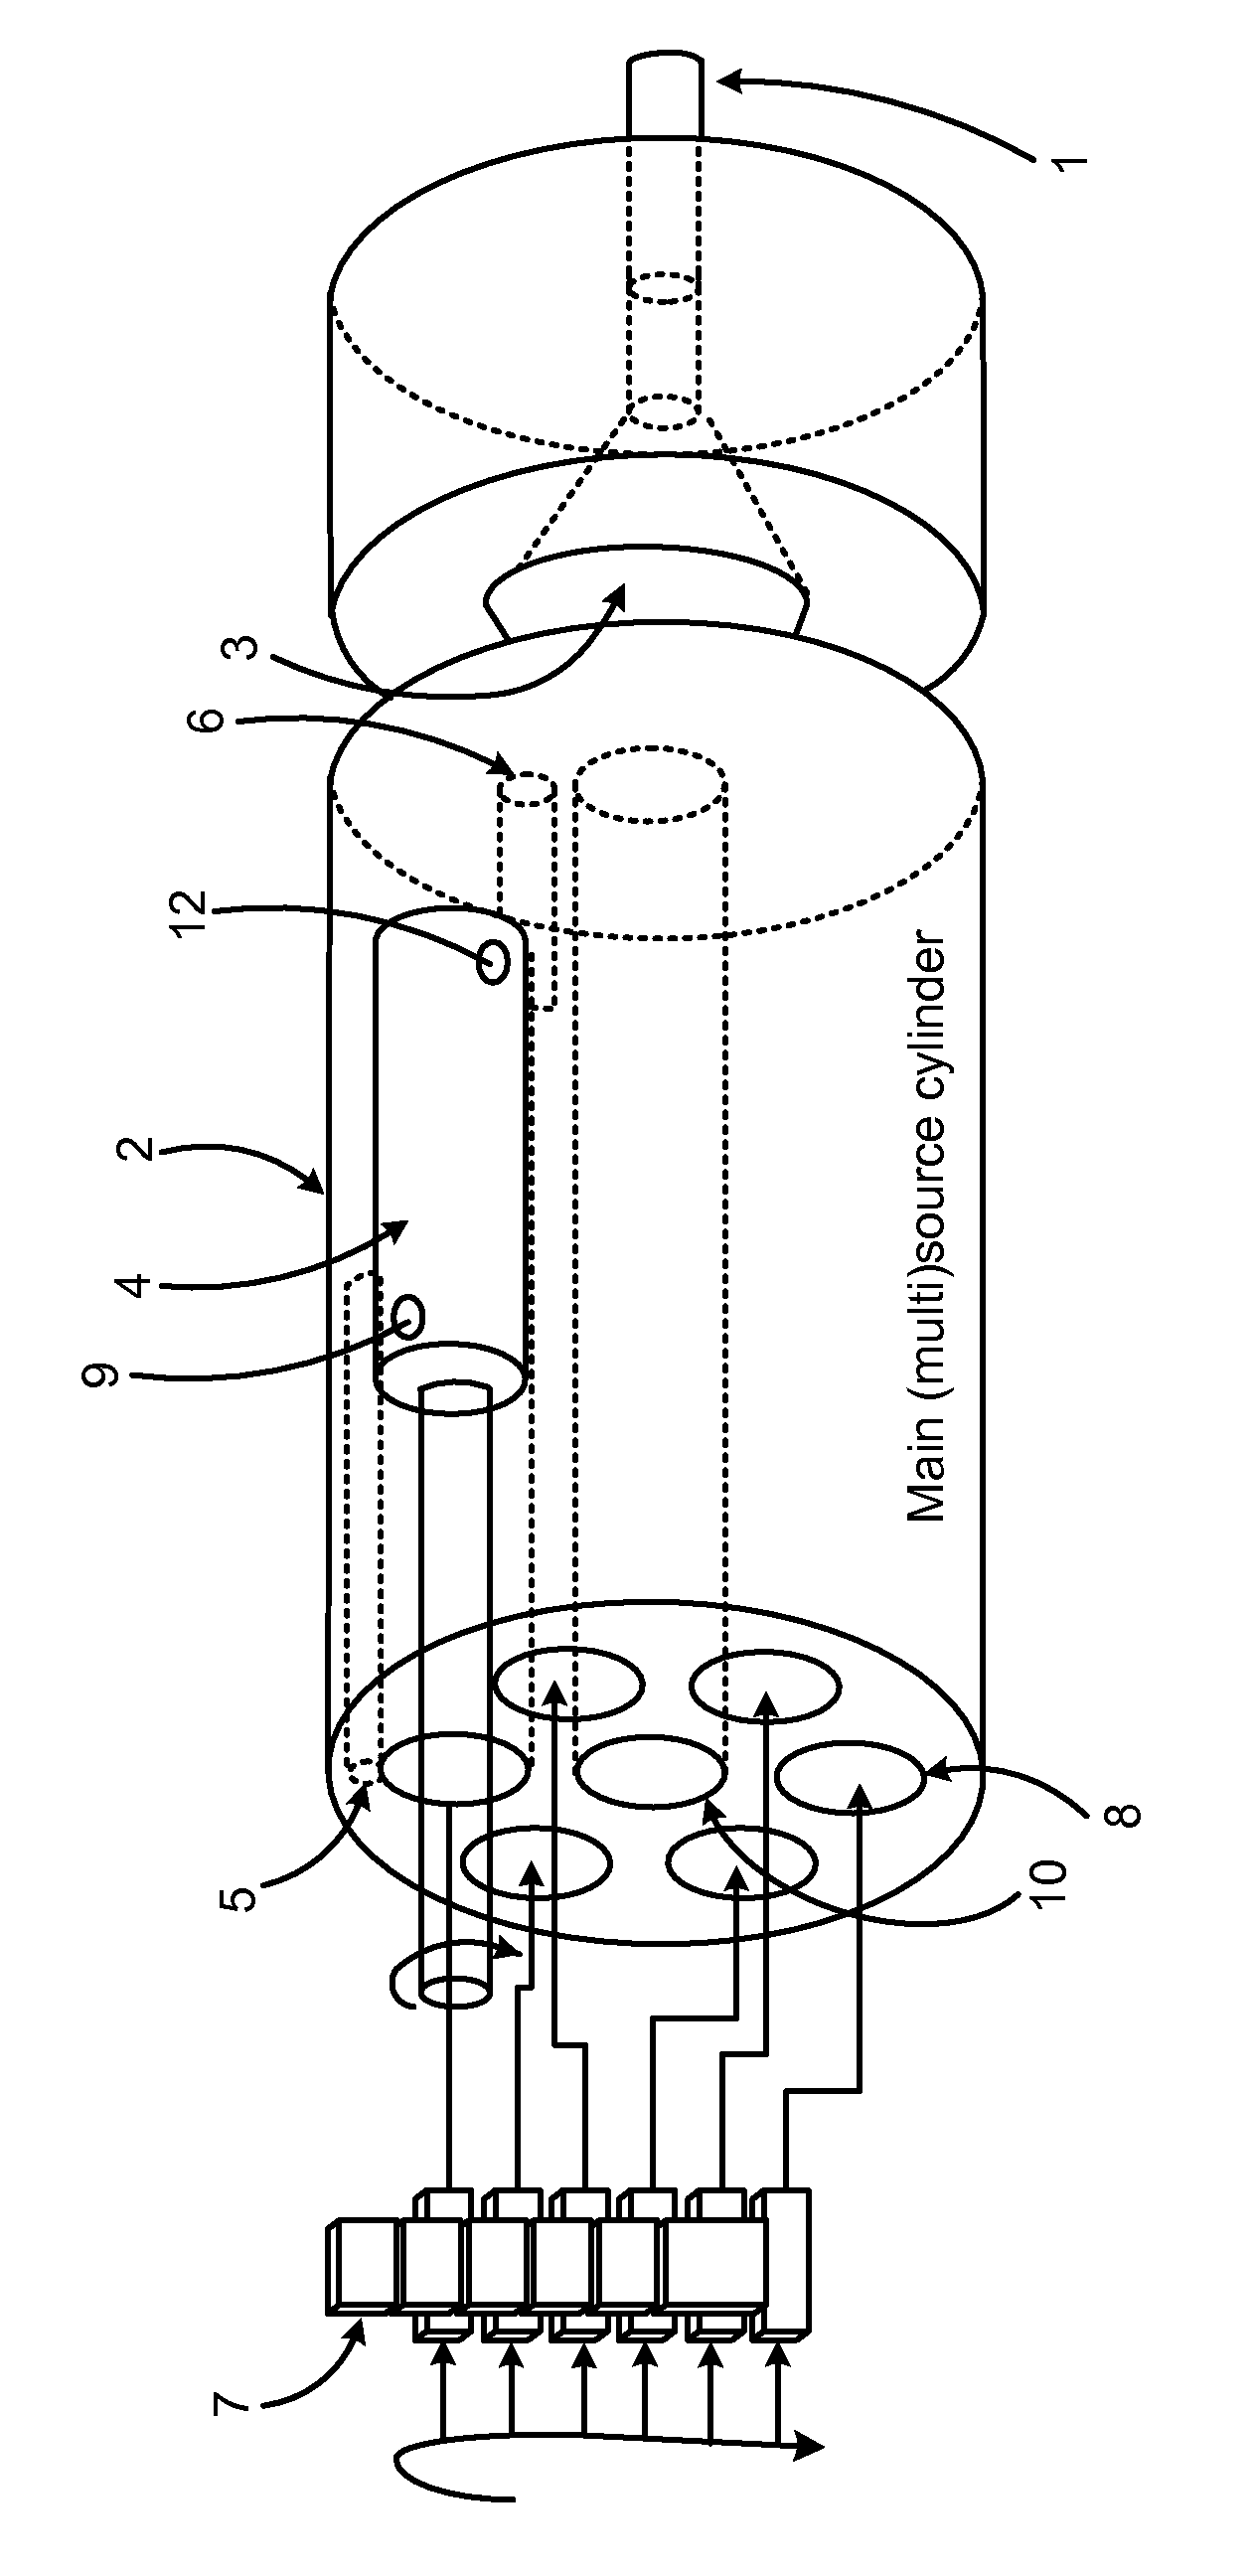 Device and Method for Organic Vapor Jet Deposition